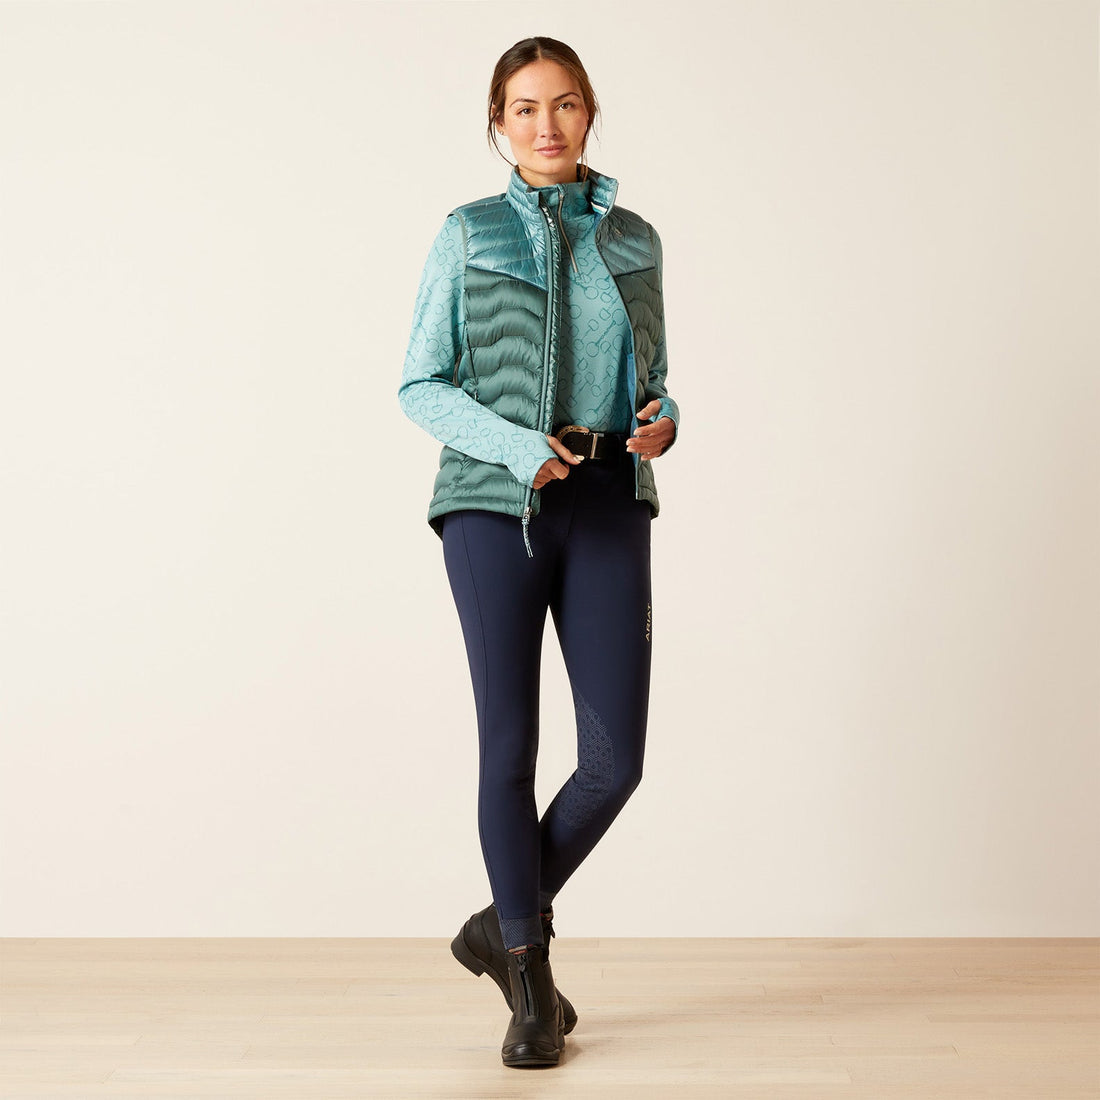 Ariat Ideal Down Gilet